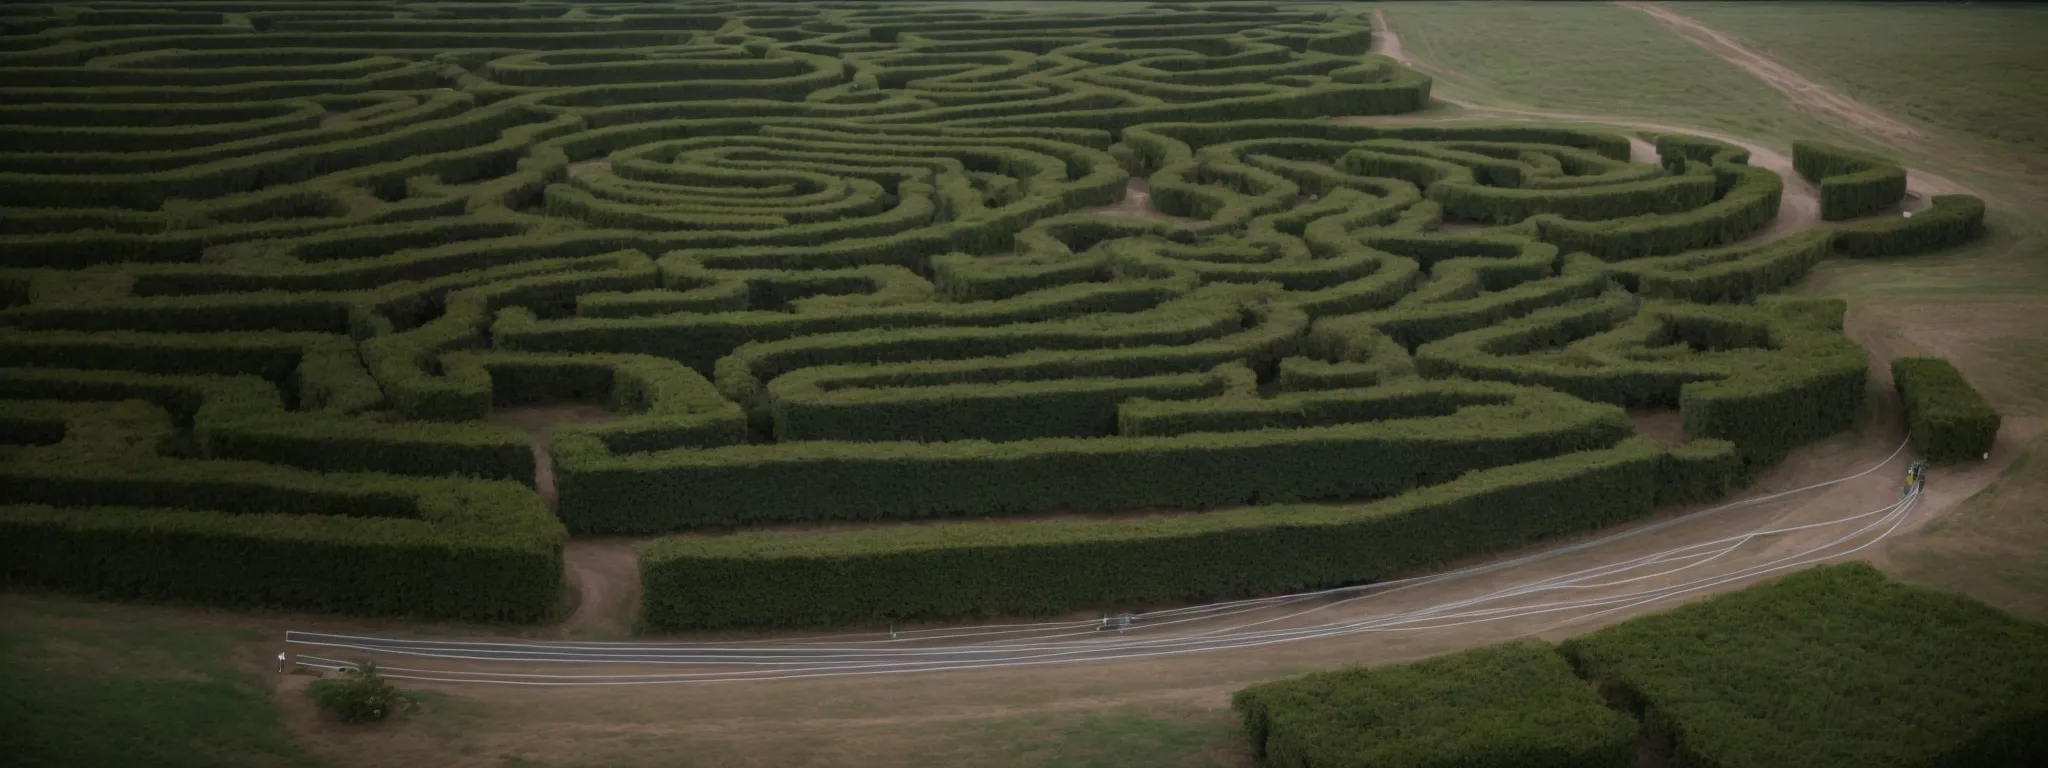 a labyrinth with a finish line ribbon, alluding to the competitive and often unethical race for seo dominance.